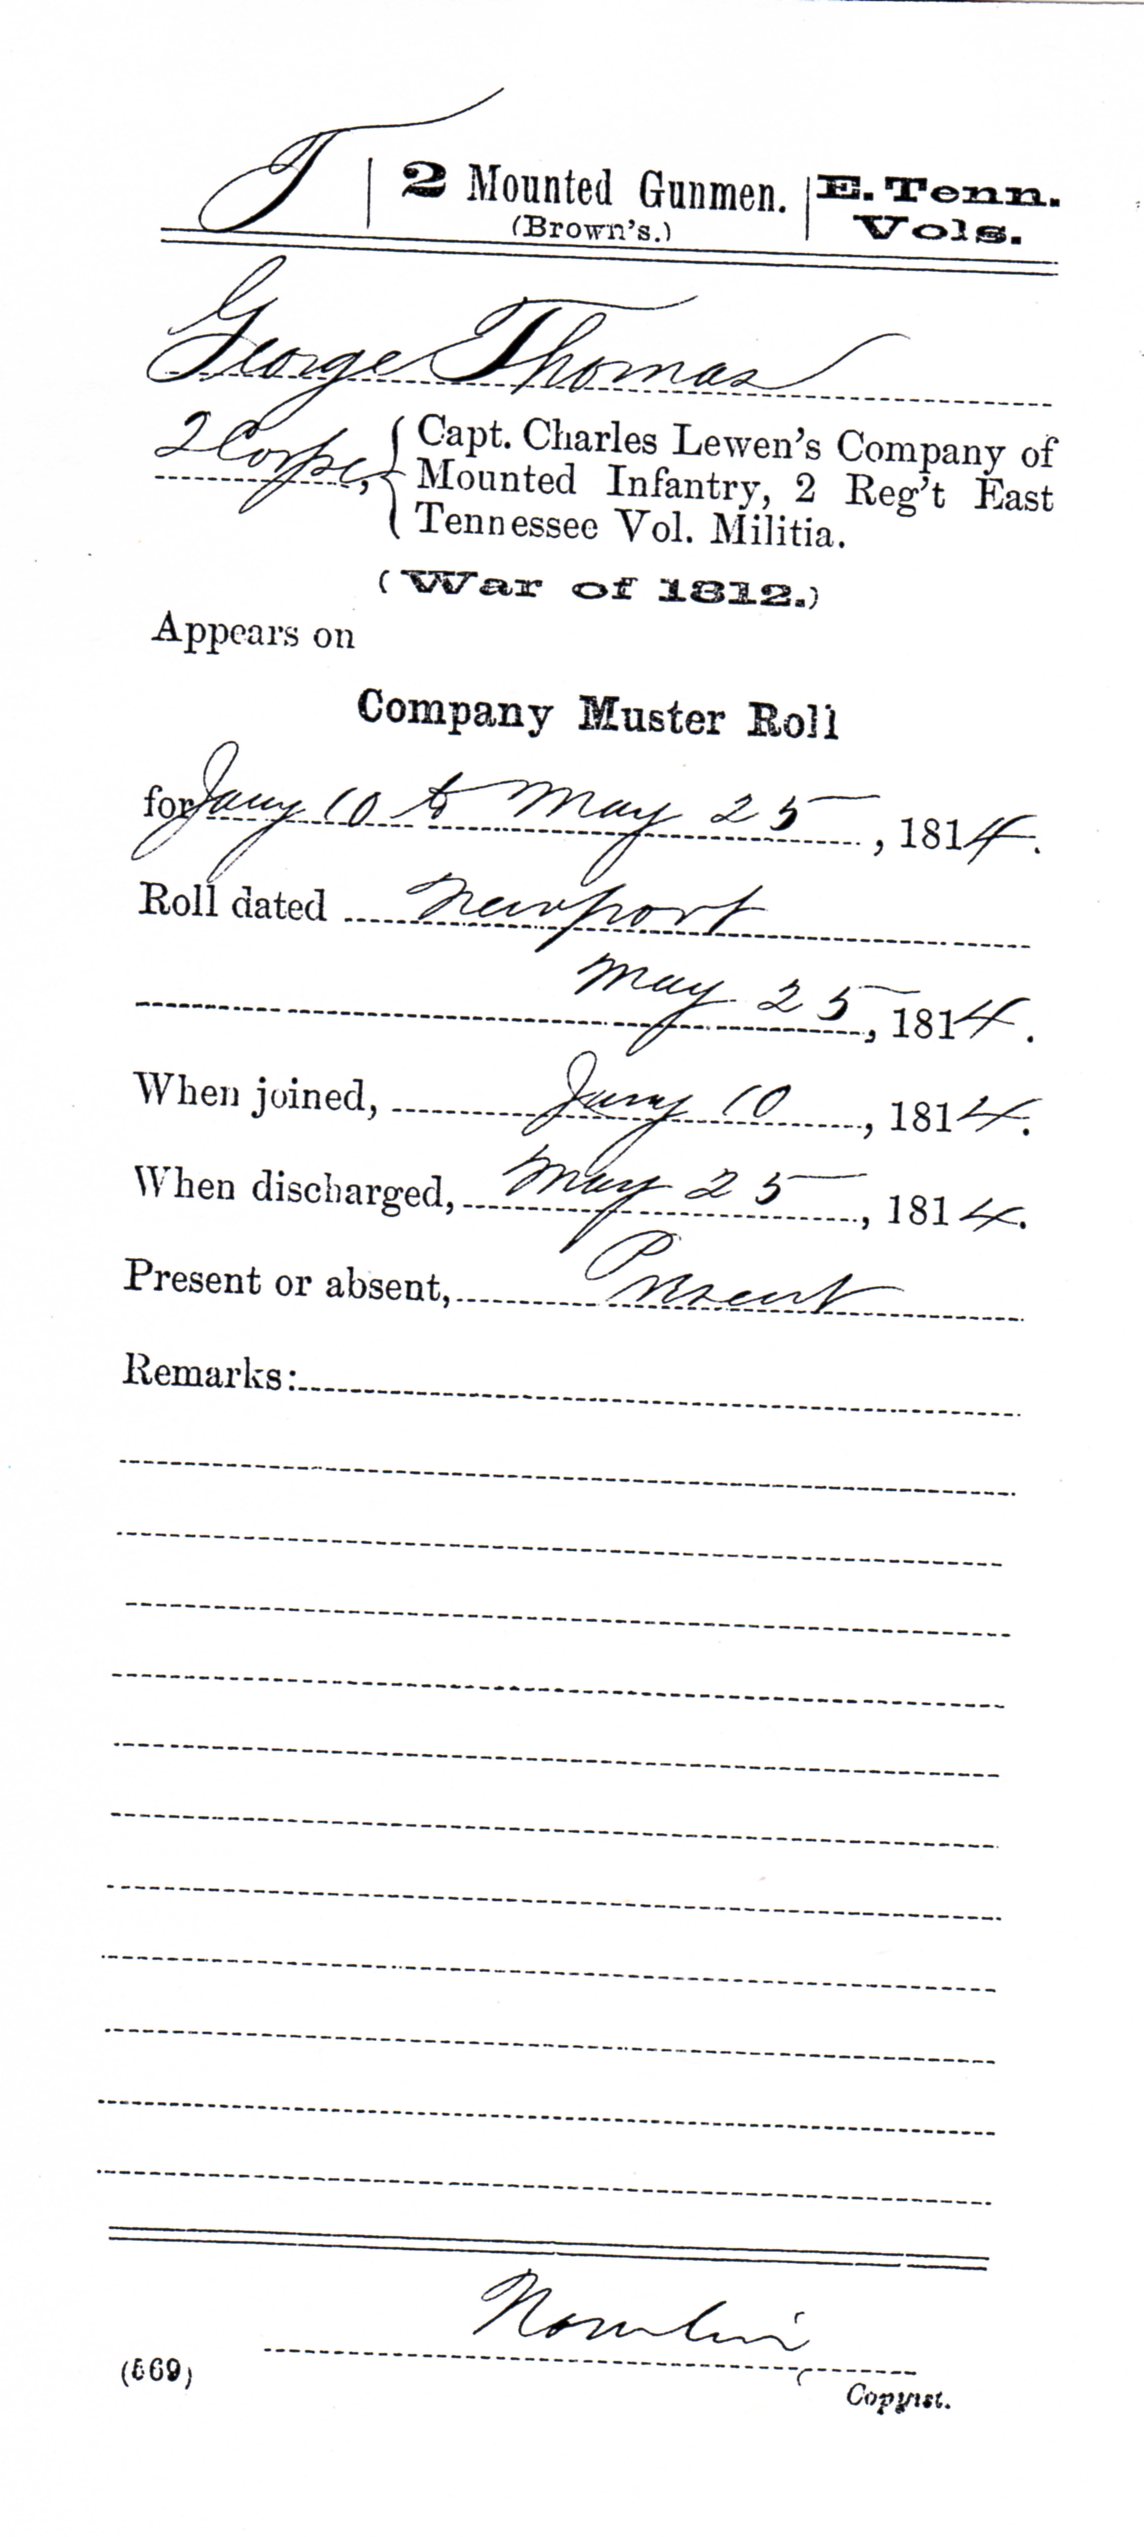 muster roll